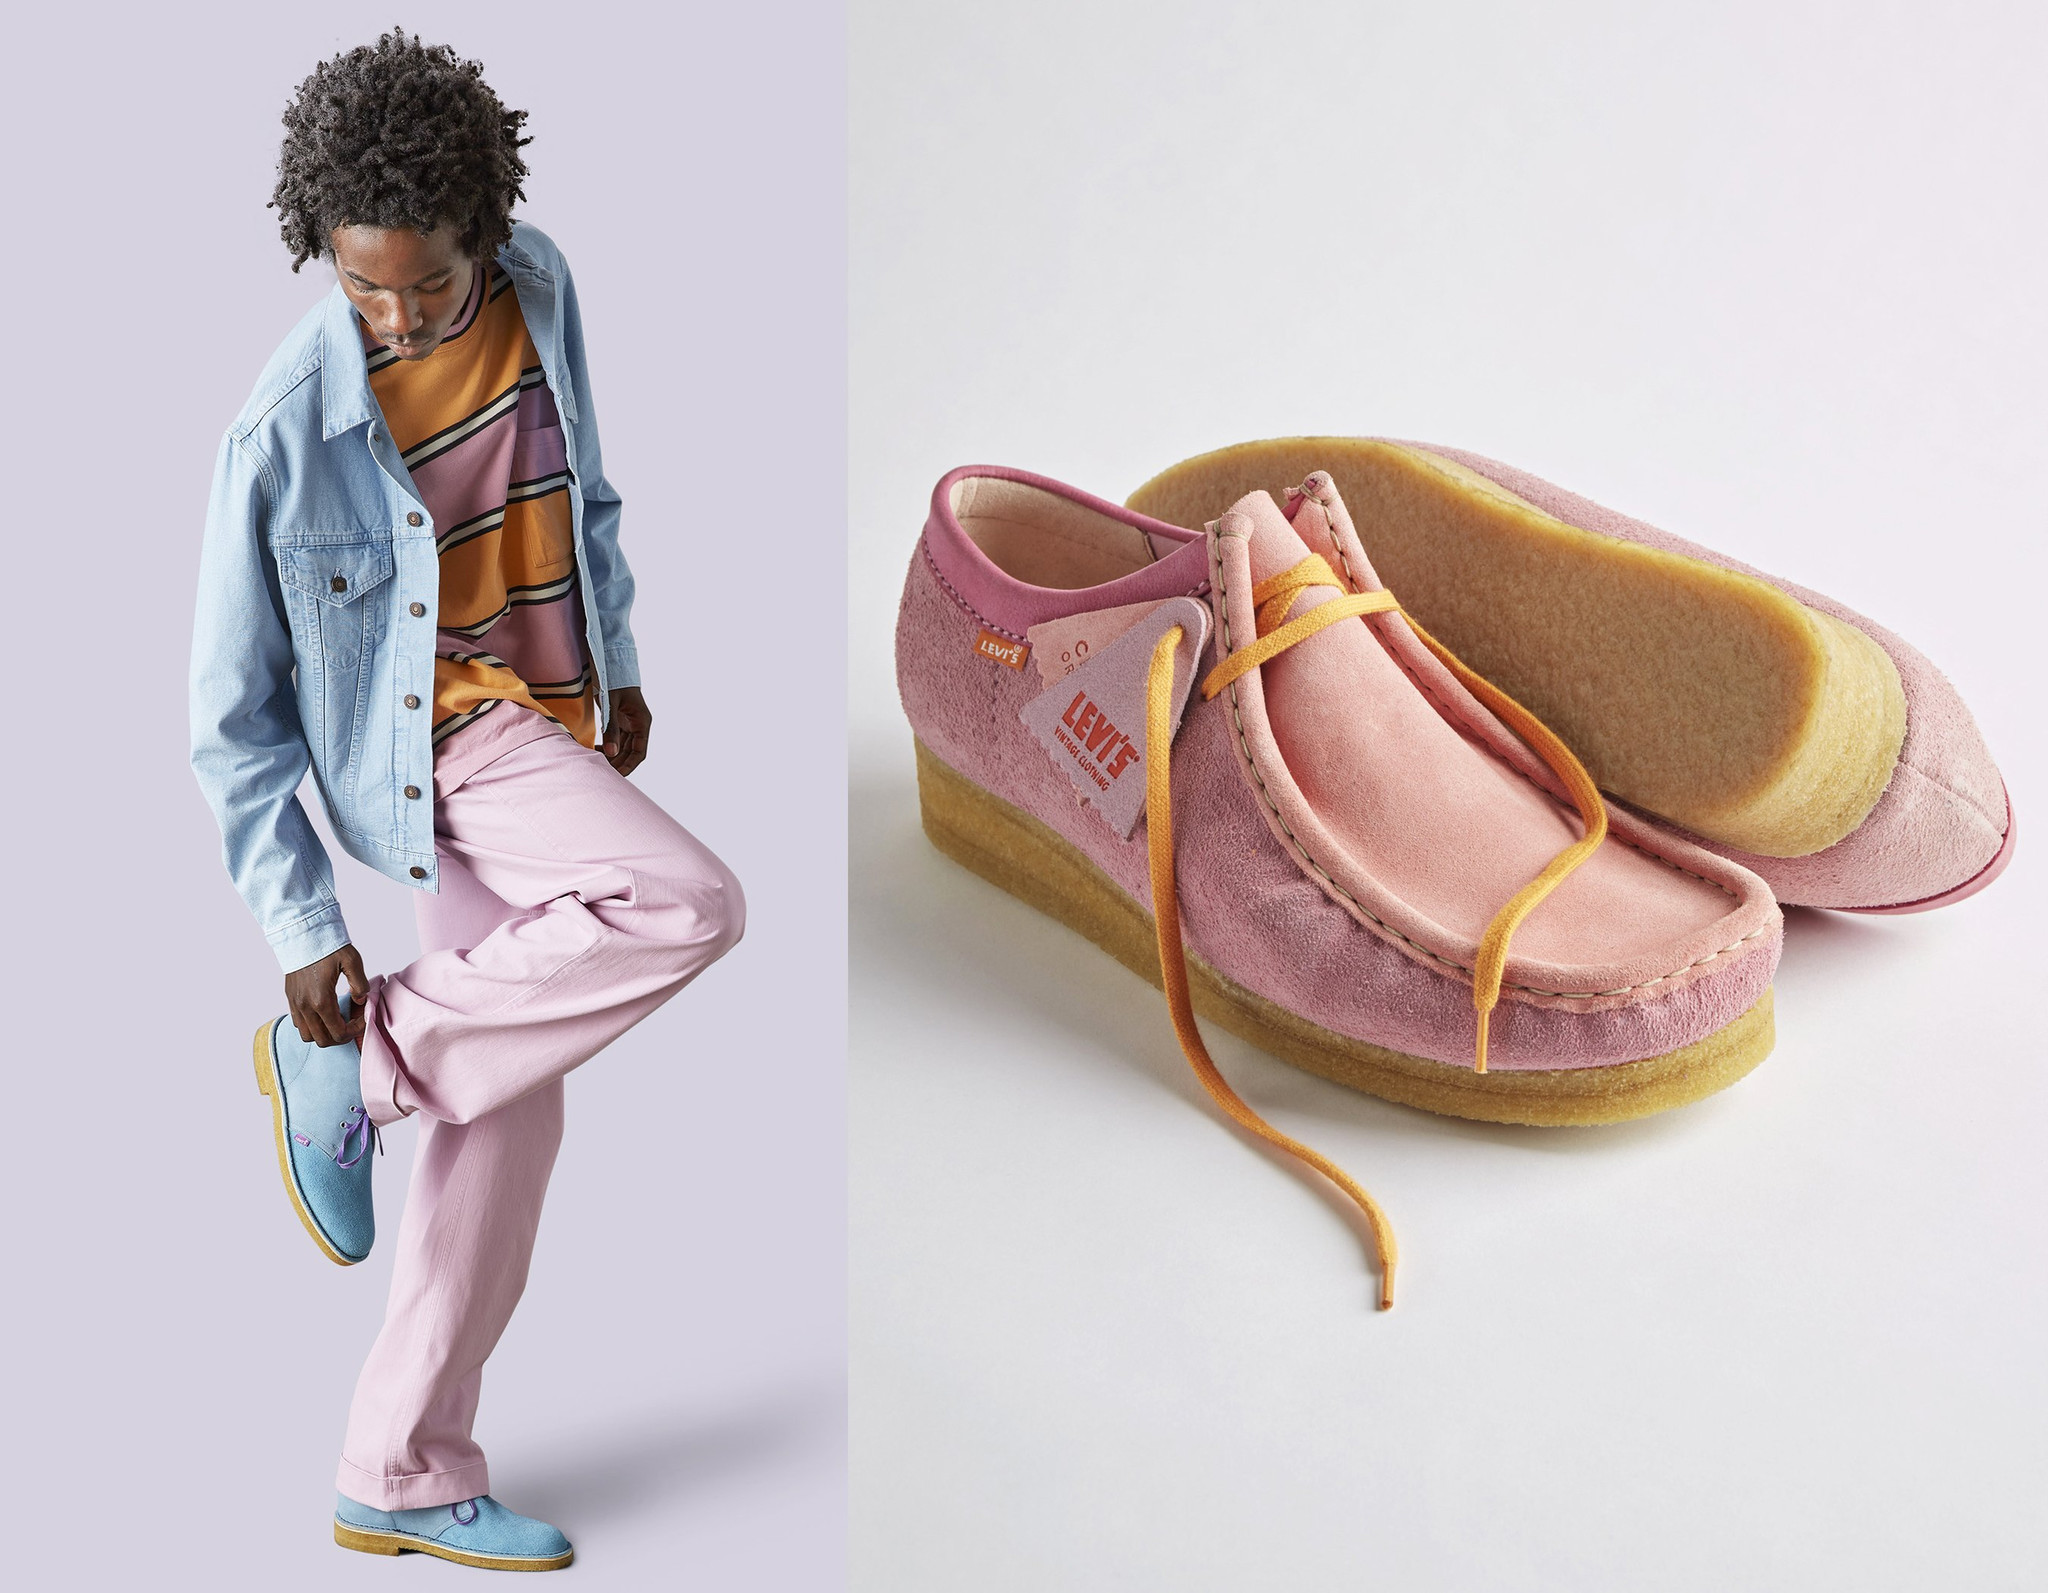 Positivo Multiplicación Admisión Levi's and Clarks team up to create summer's hottest shoes. OMG, did you  see this?